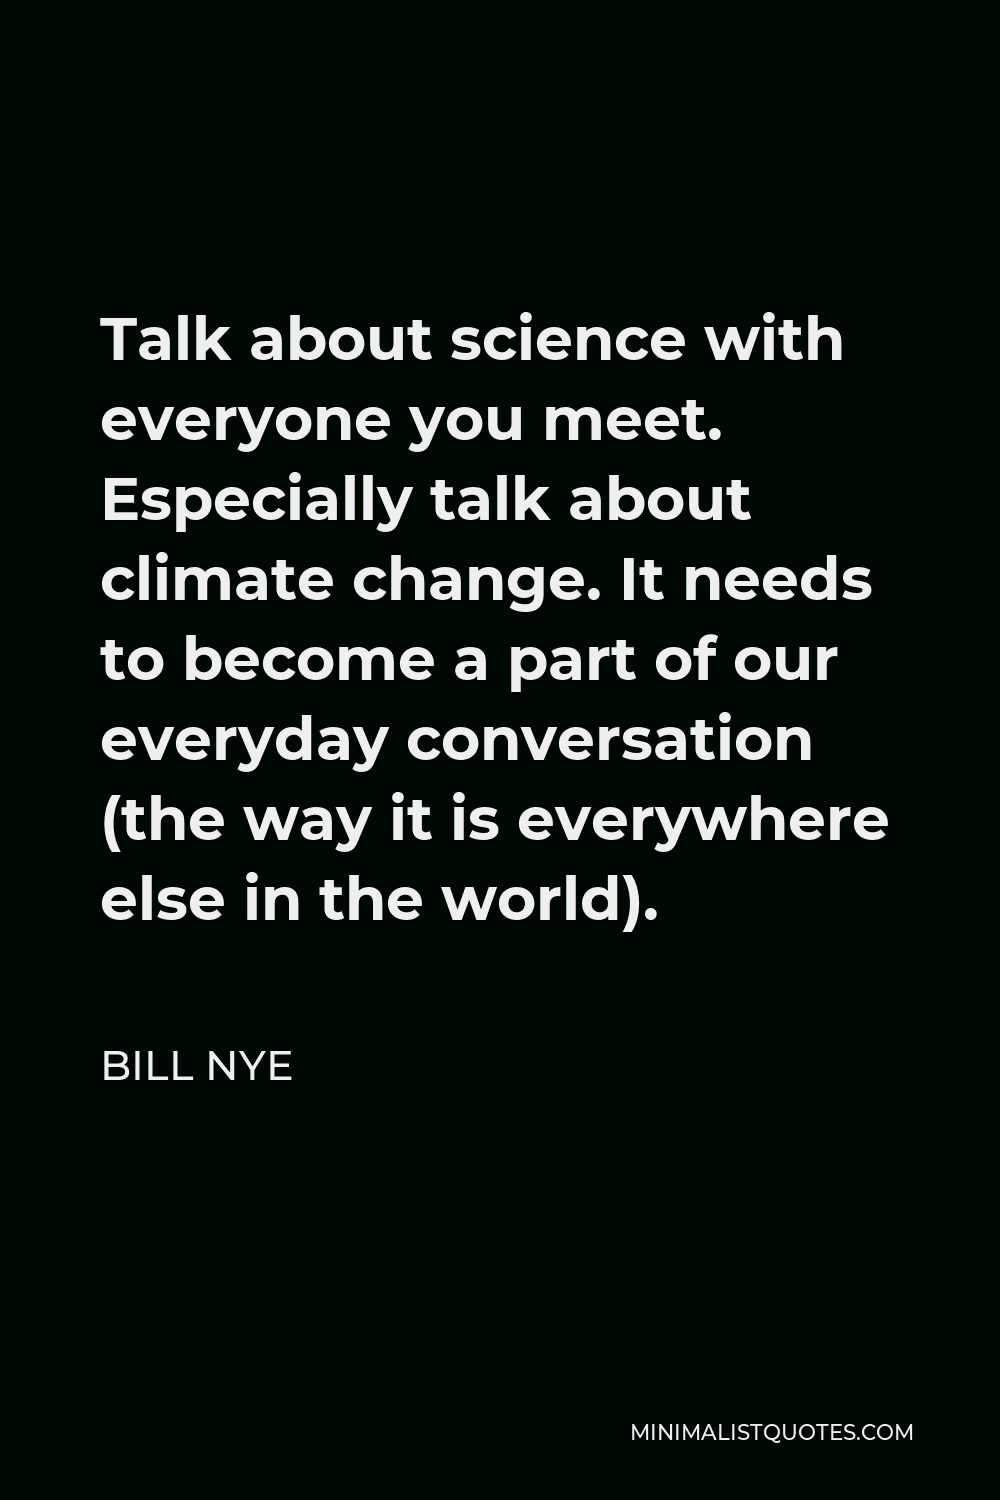 Bill Nye Quote - Talk about science with everyone you meet. Especially talk about climate change. It needs to become a part of our everyday conversation (the way it is everywhere else in the world).